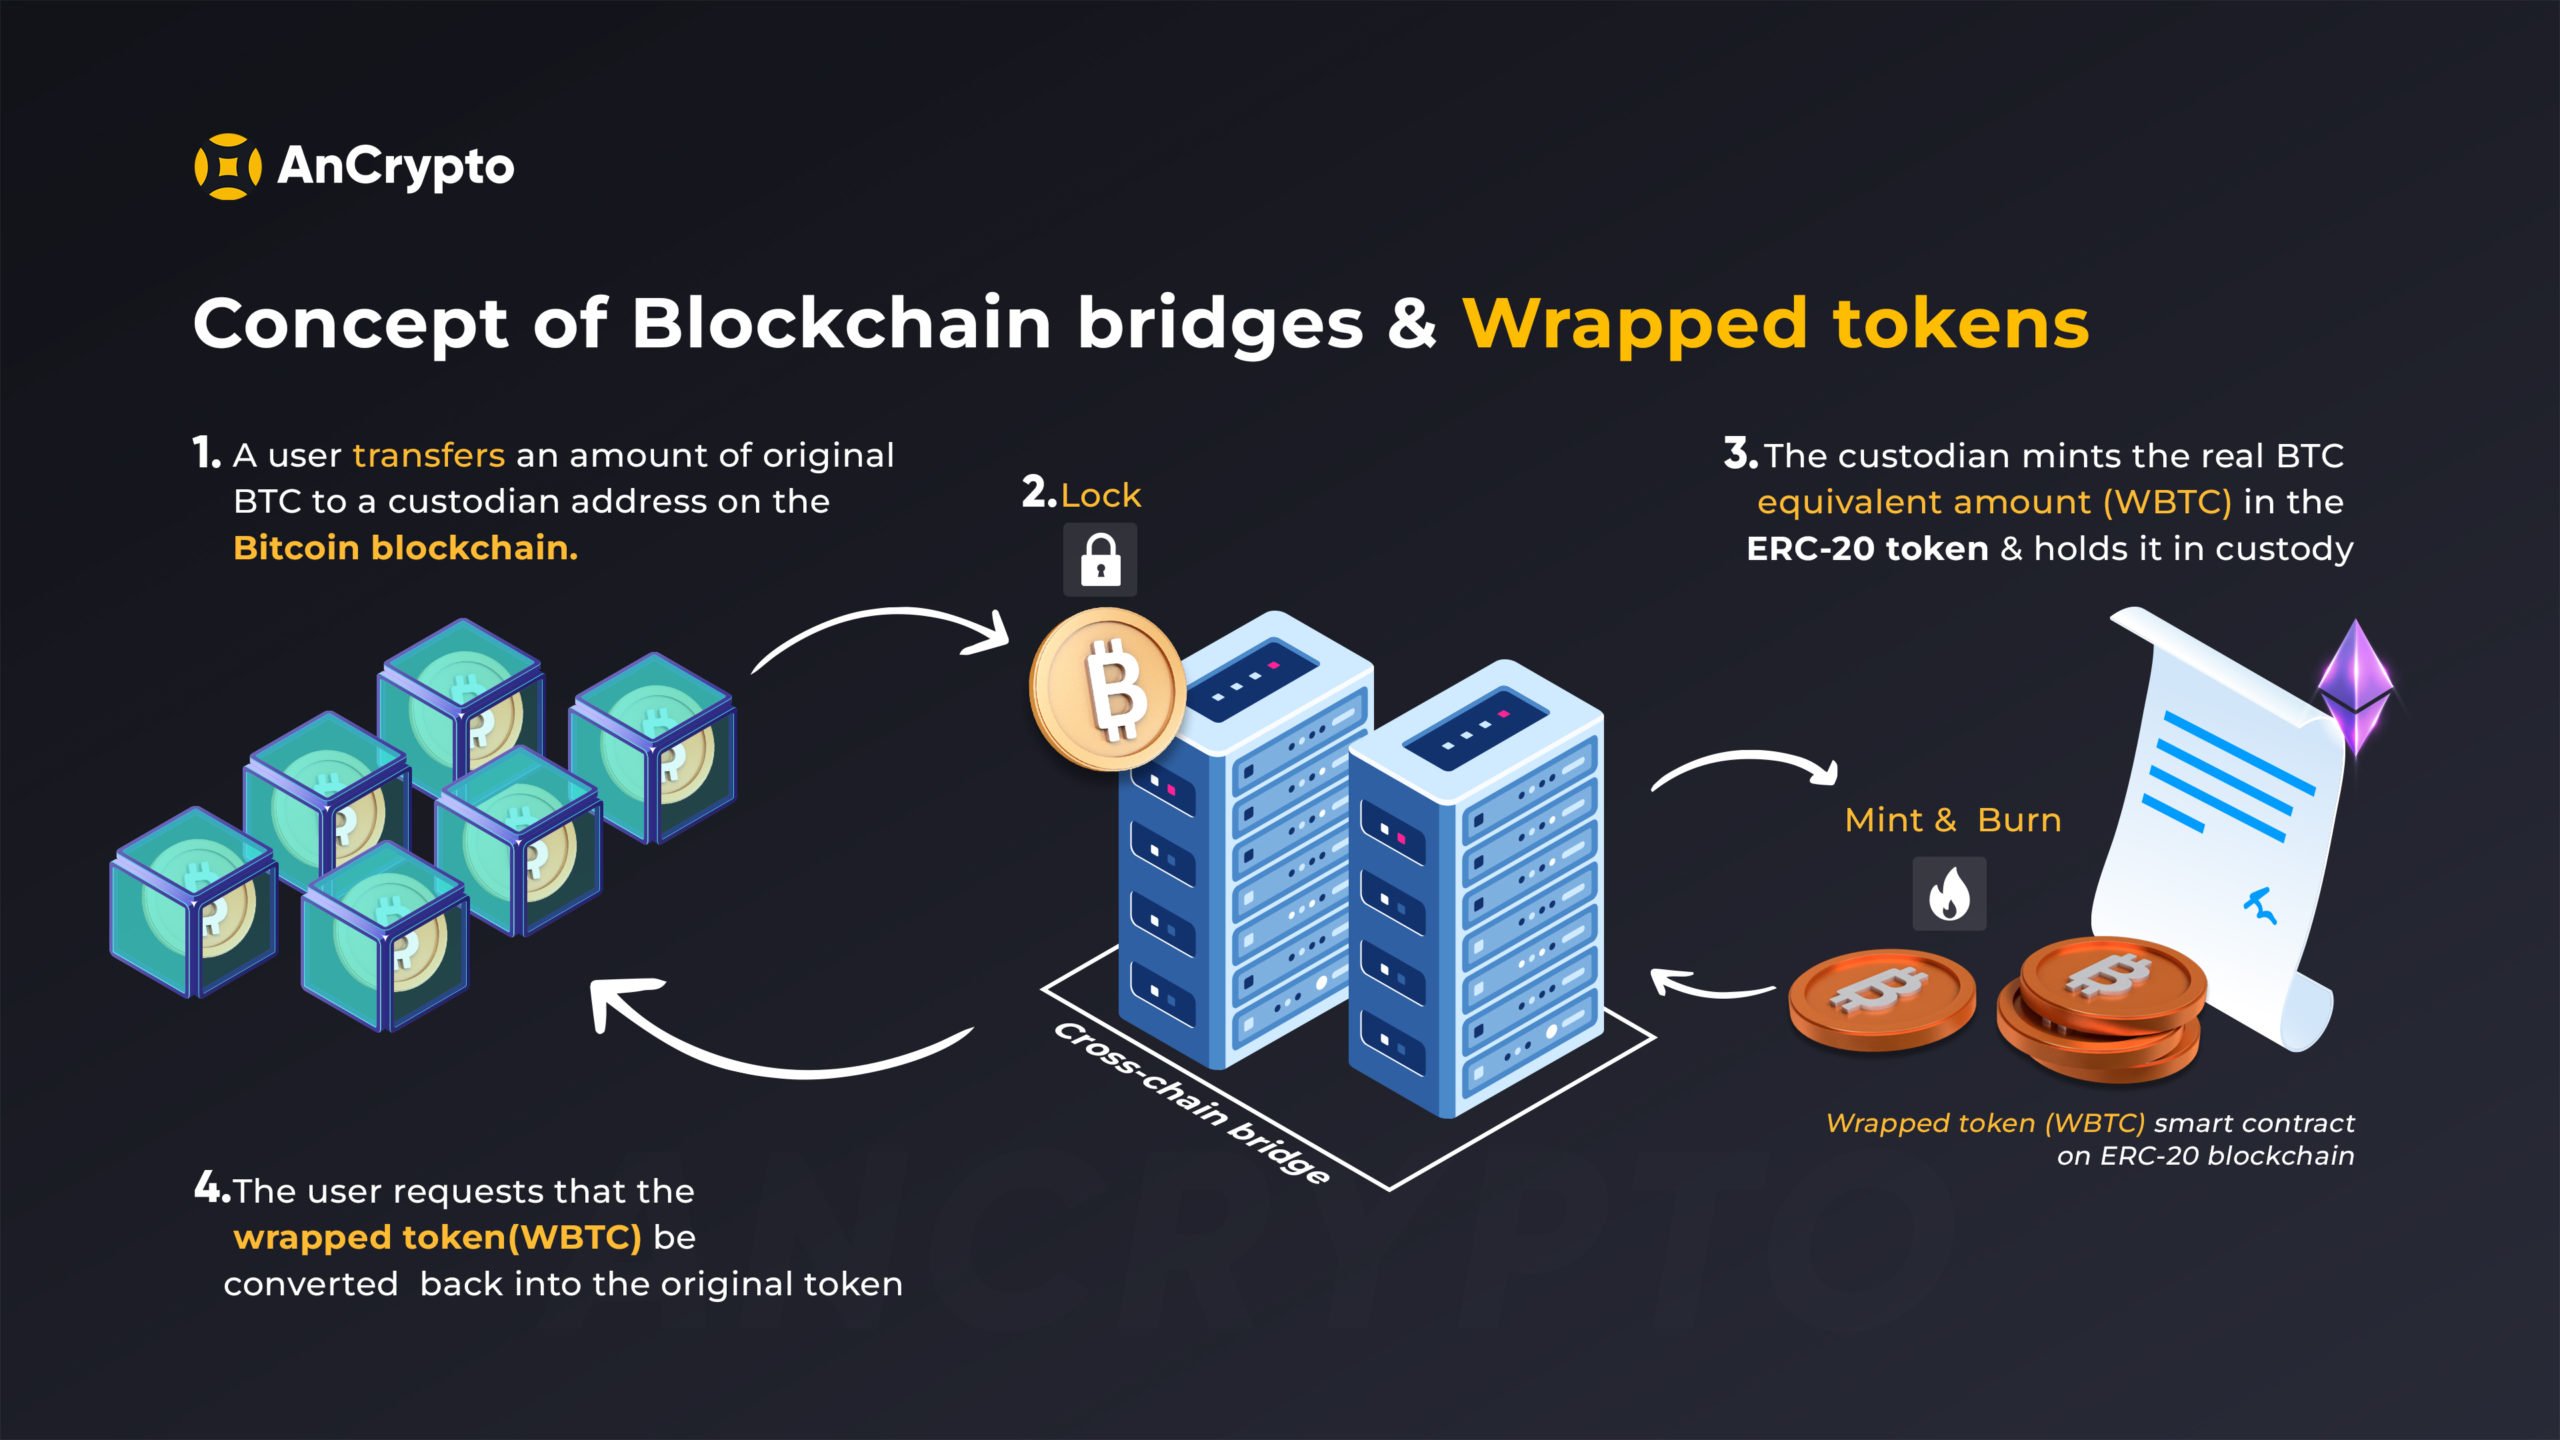 Concept of Blockchain Bridges and Warpped Tokens